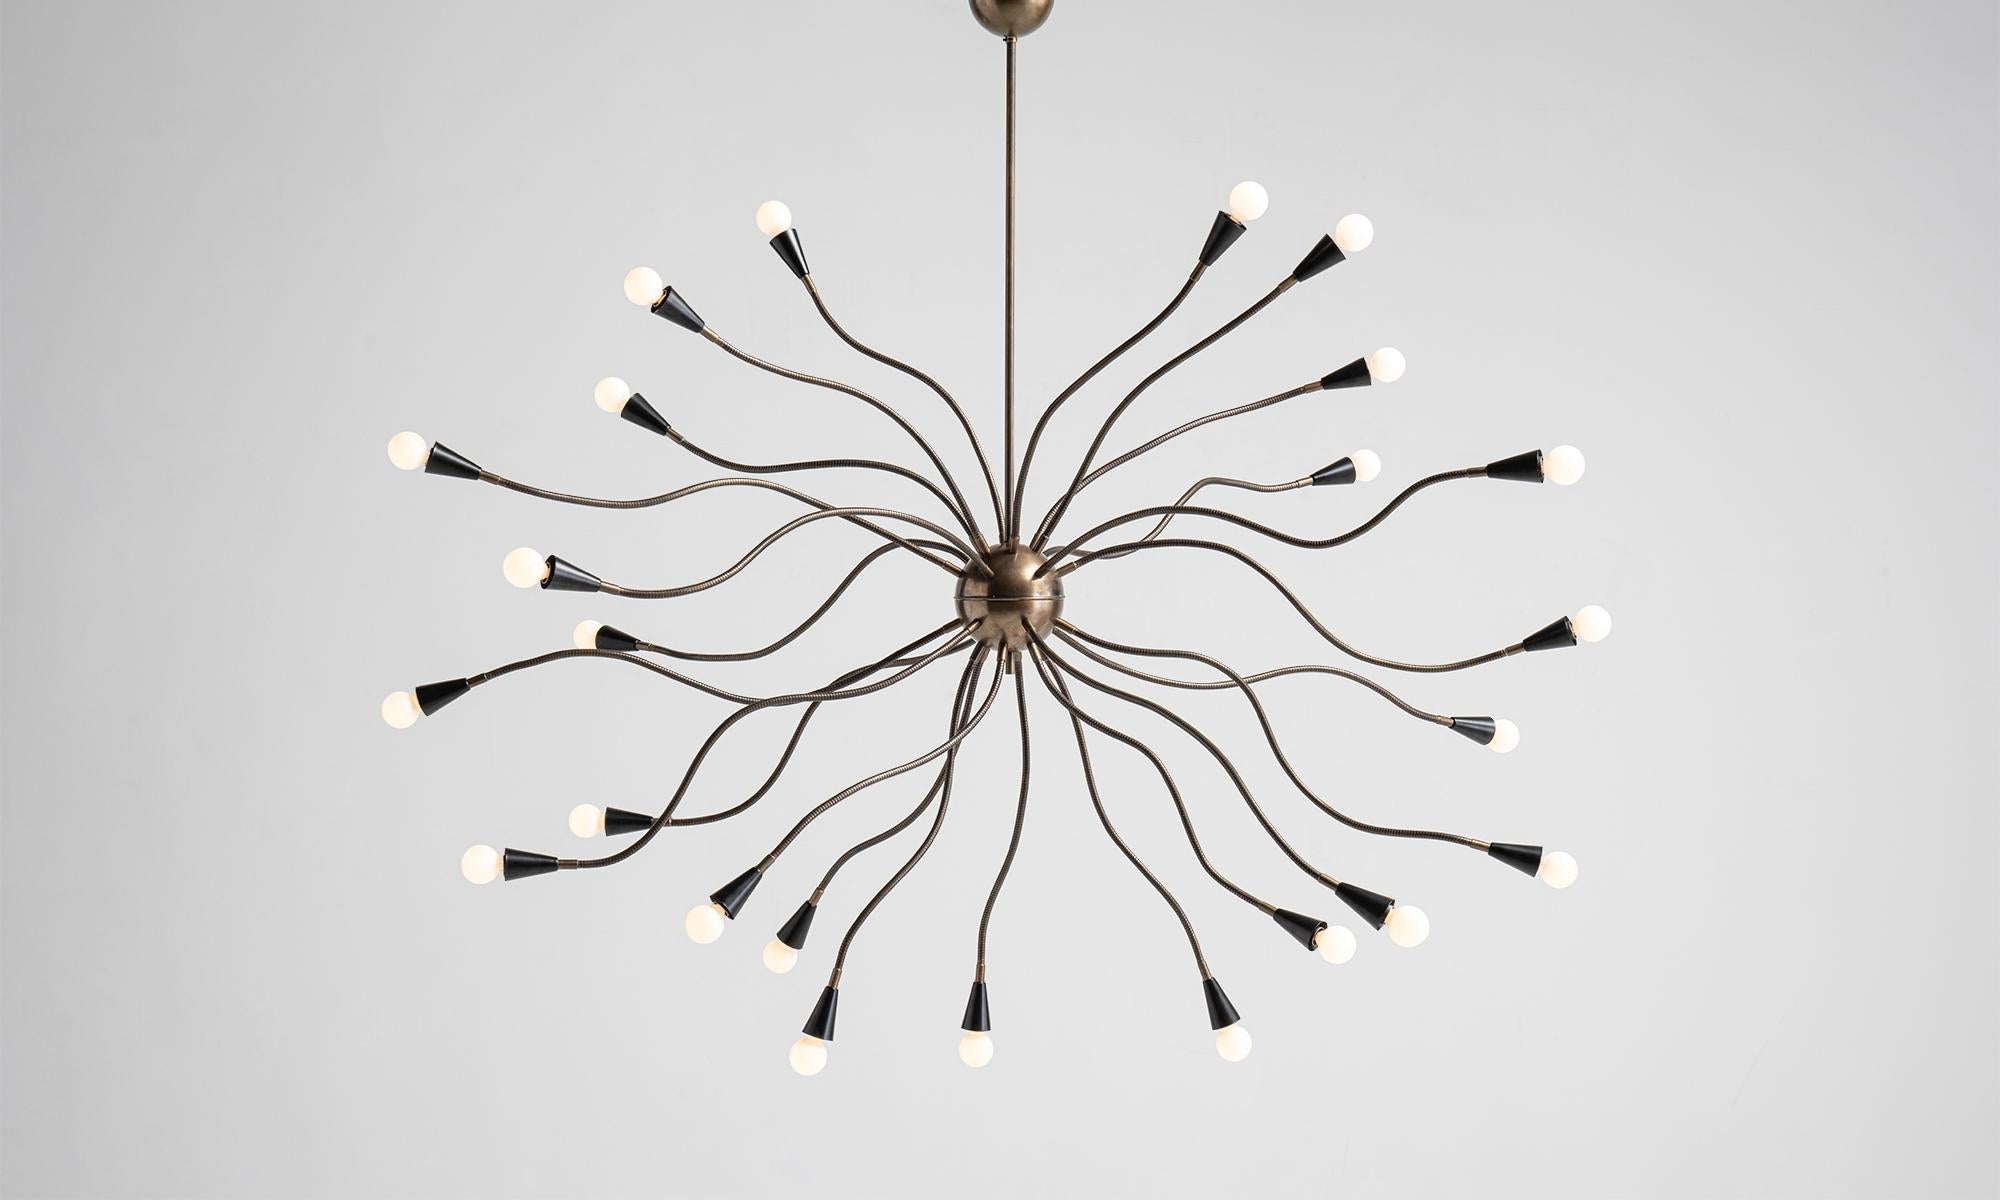 Medusa Chandelier
Italy, 21st Century
Metamorphic chandelier with 25 articulating brass arms and painted black metal shades.
64